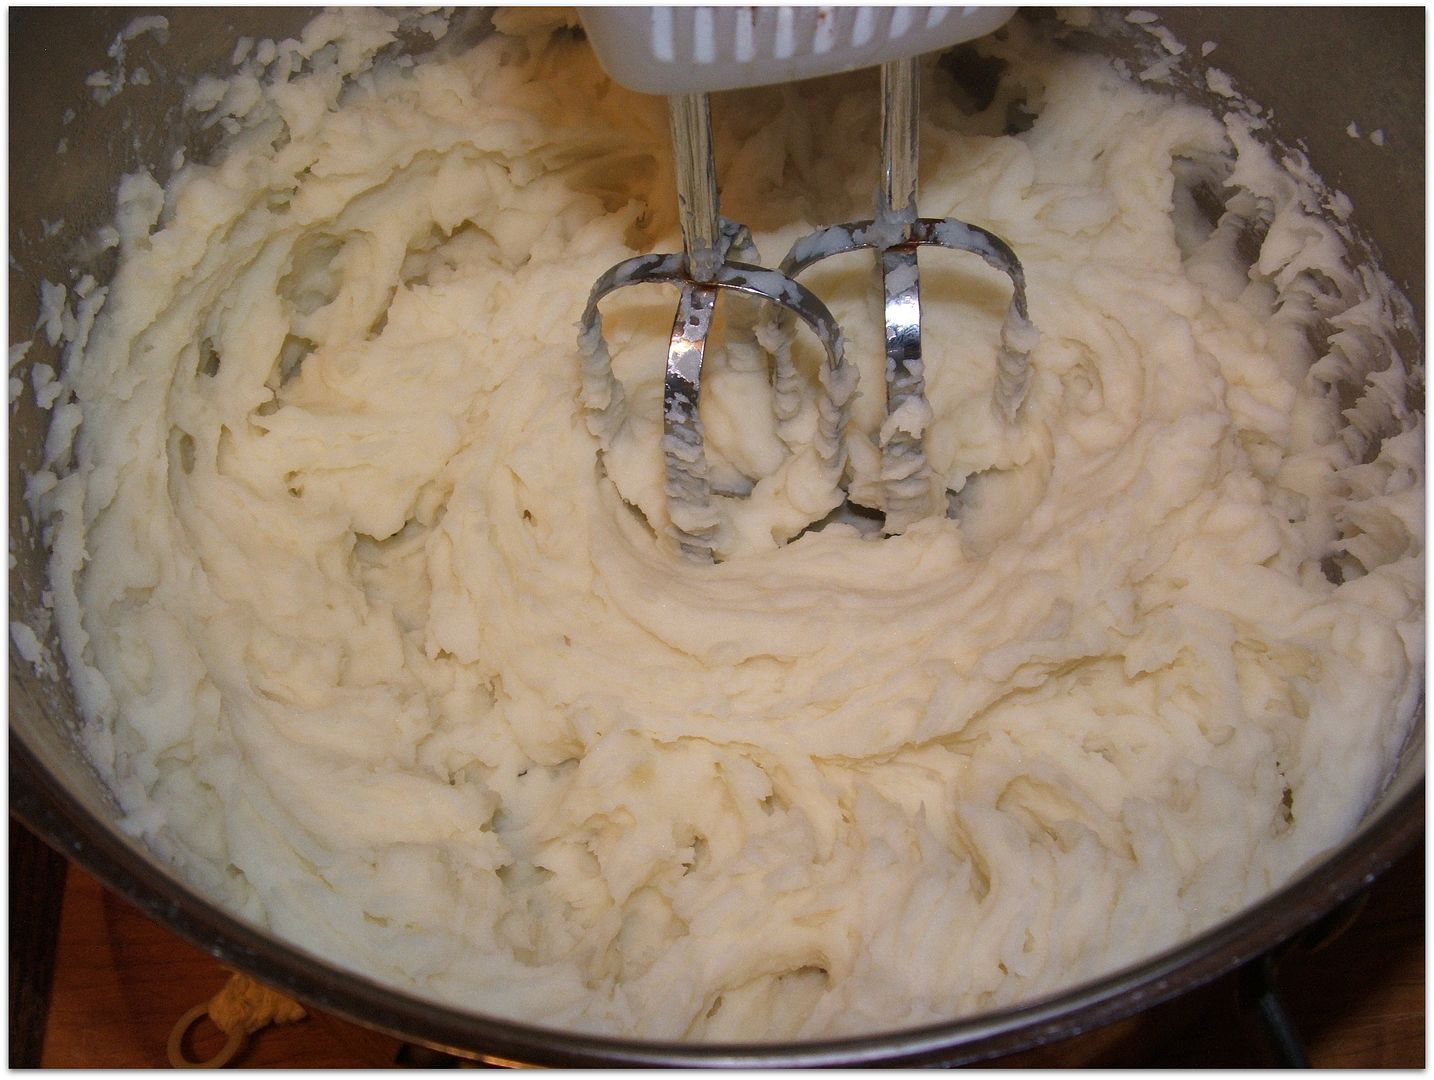 Real Mashed Potatoes by Angie Ouellette-Tower for godsgrowinggarden.com photo 010_zps553e9bfc.jpg